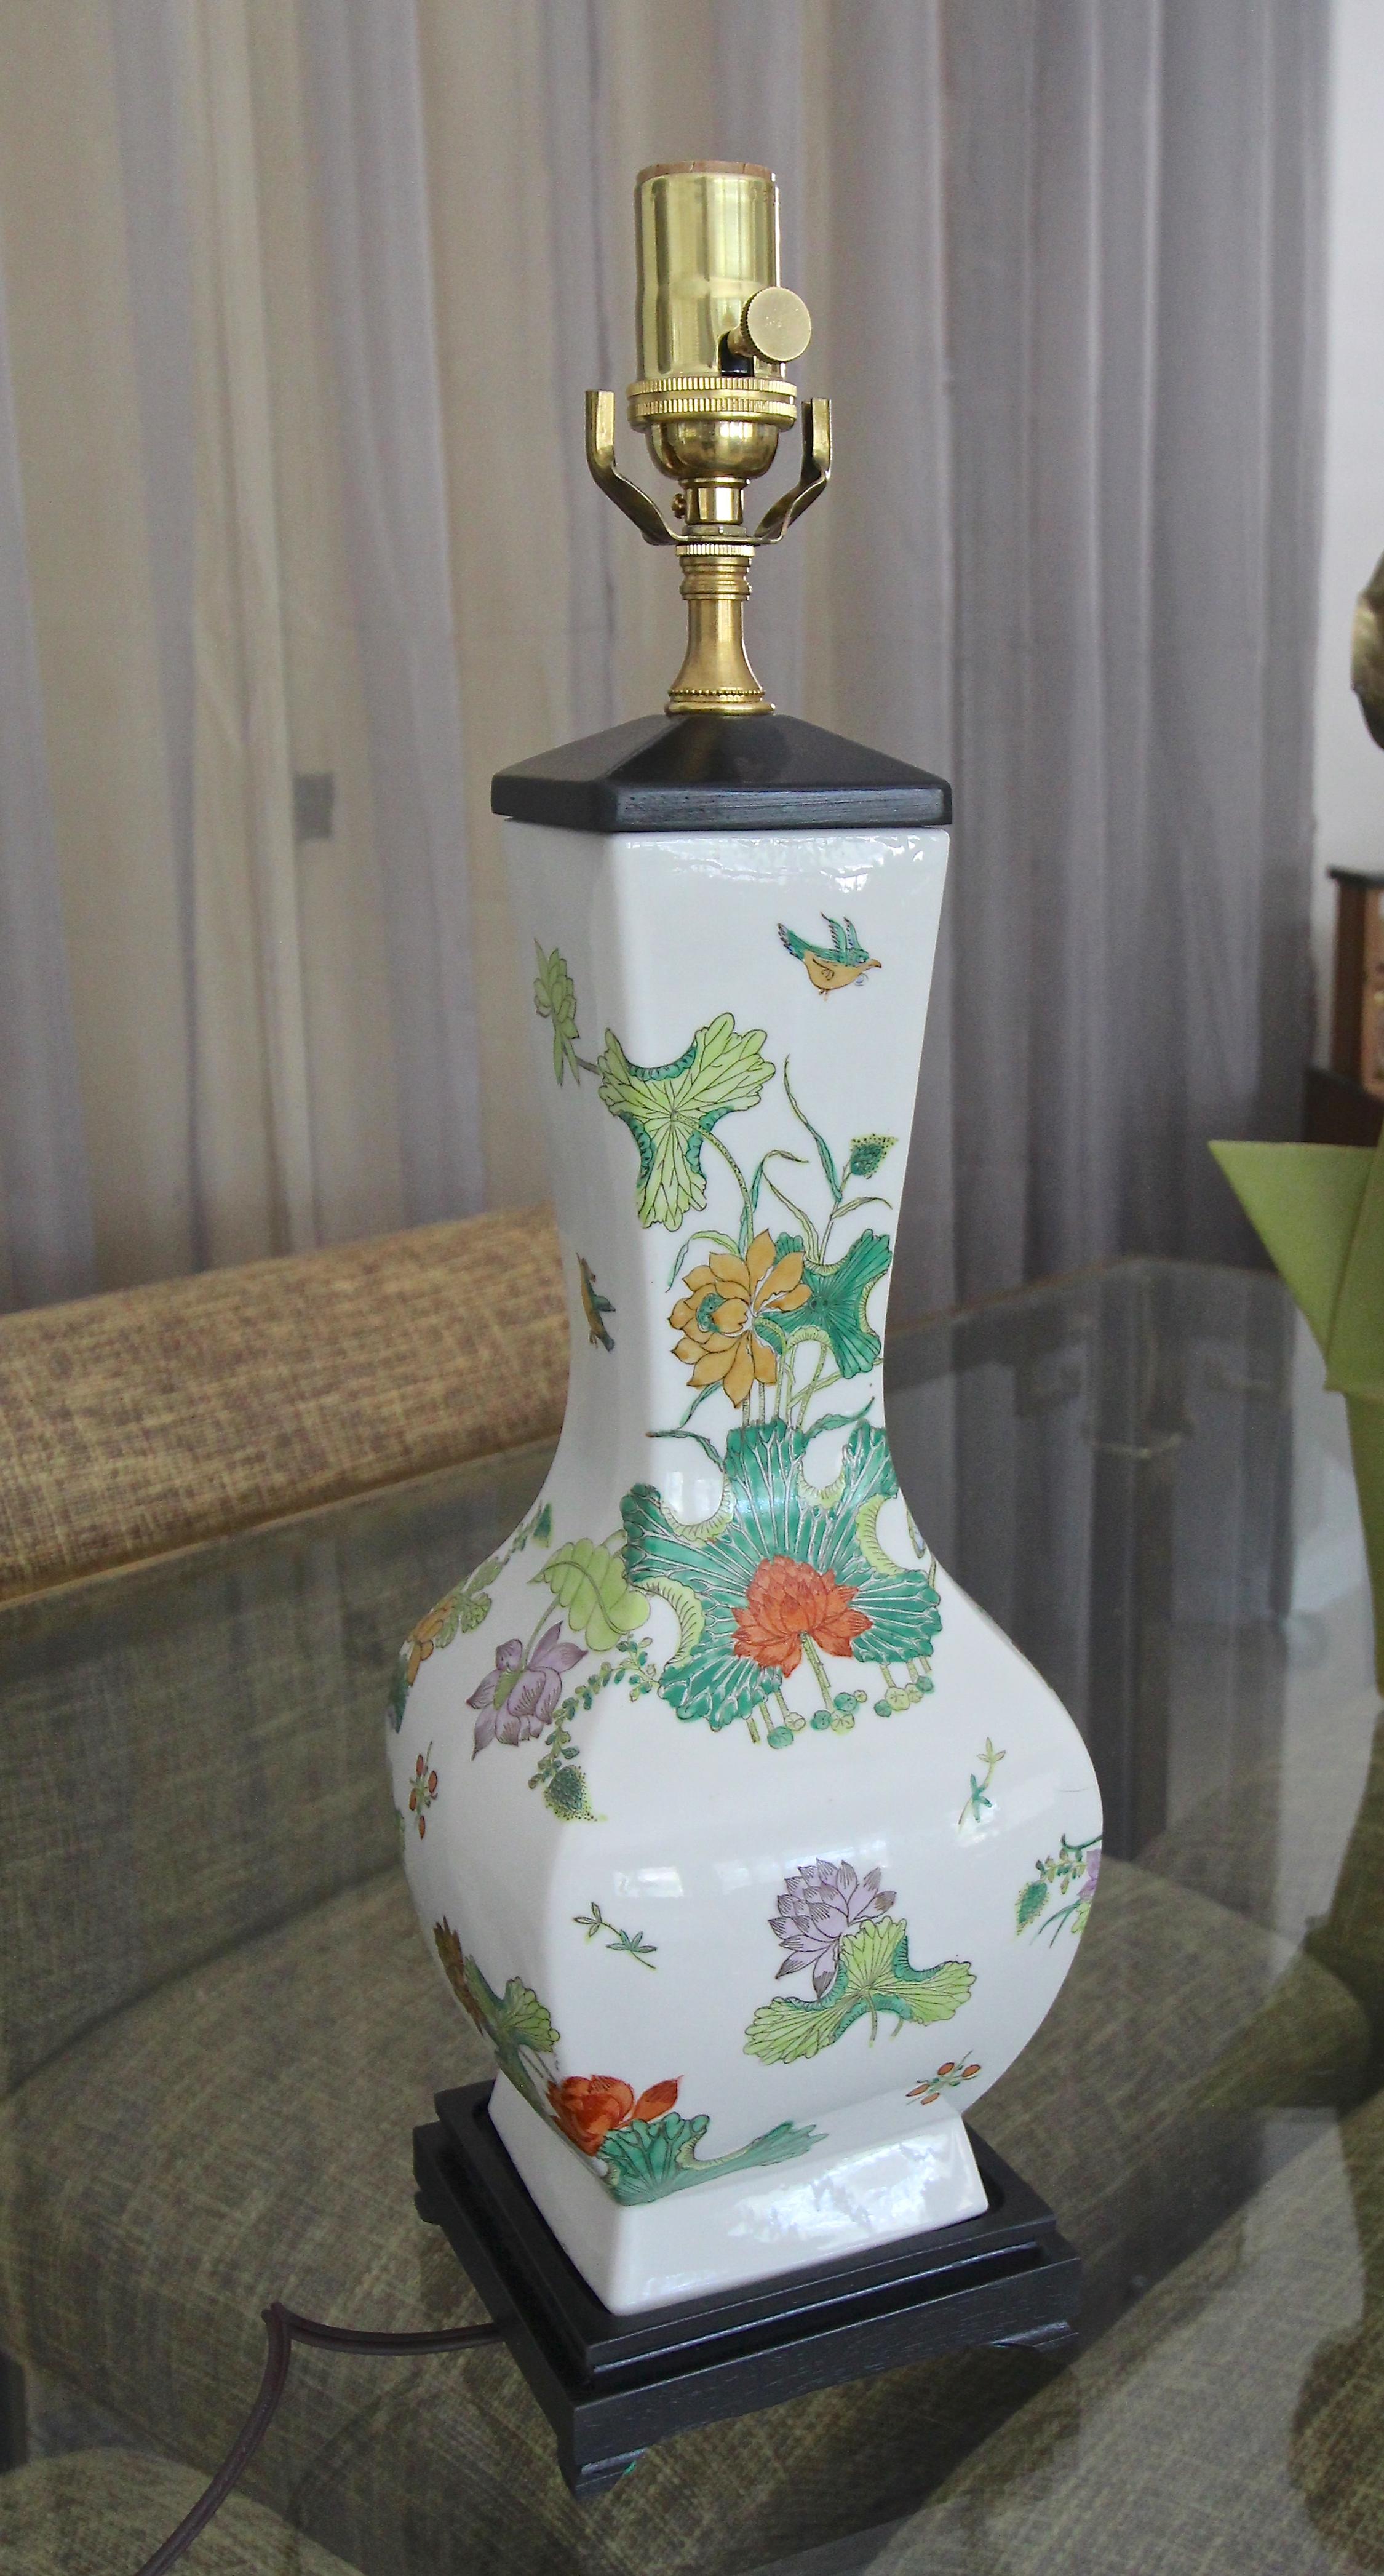 Single Chinese porcelain Famille rose vase mounted as table lamp on black painted wood turned base. Beautifully crafted with bright applied floral images. Newly wired including new brass fittings and 3-way socket.
Measures: Height to top of